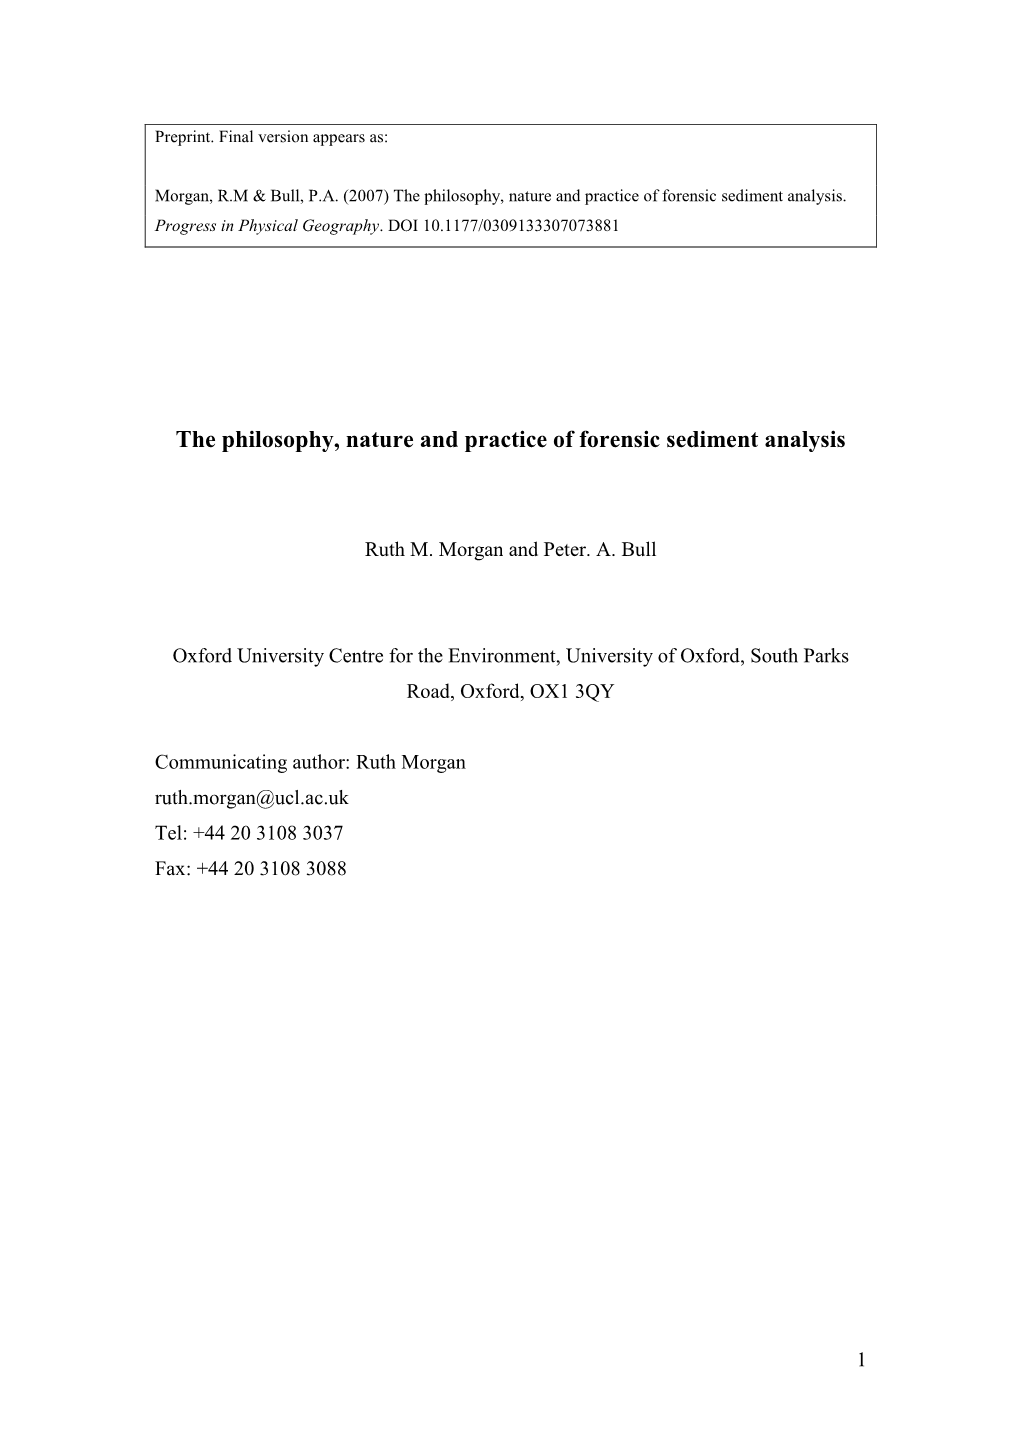 The Philosophy, Nature and Practice of Forensic Sediment Analysis